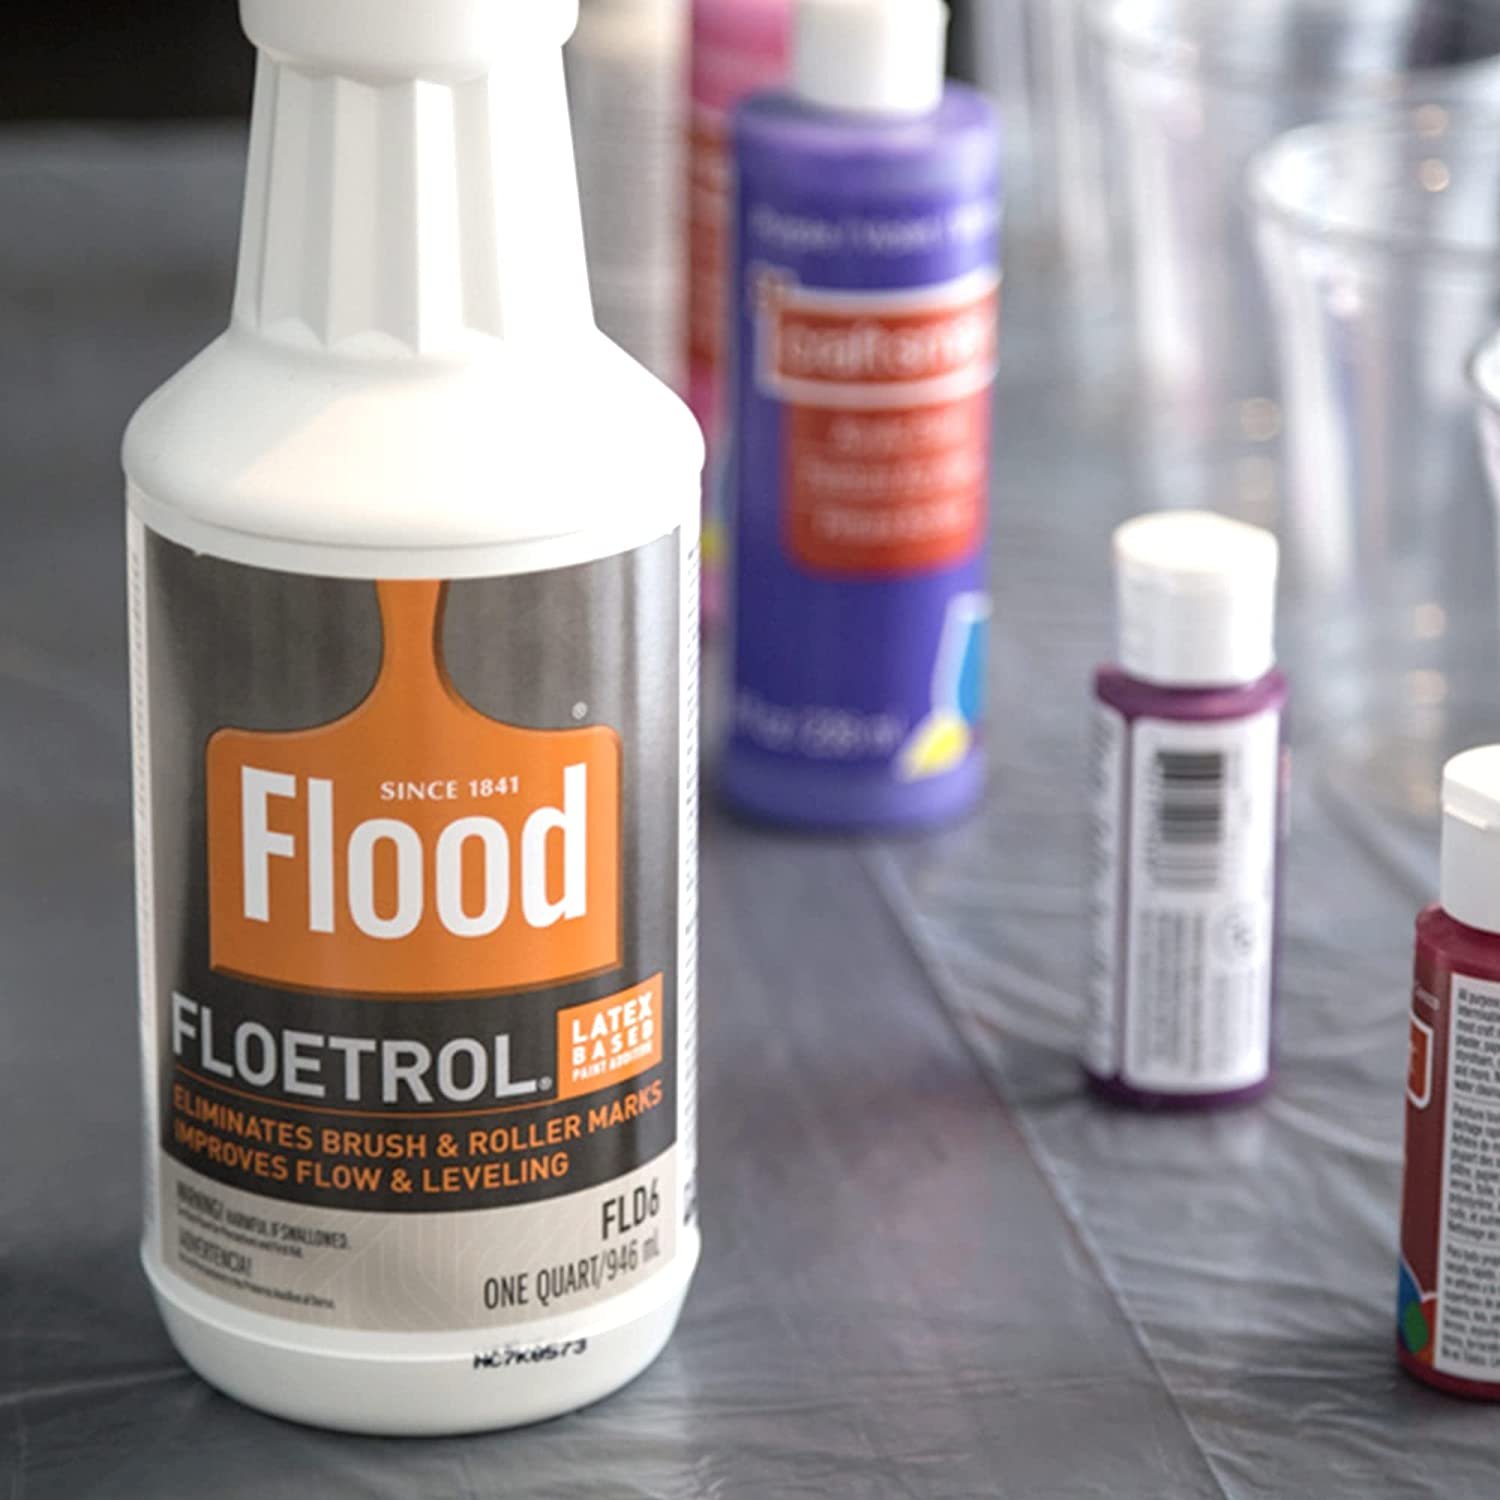 Floetrol Pouring Medium for Acrylic Paint  Flood Flotrol Additive  Pixiss Acrylic Pouring Oil for Creating Cells Perfect Flow 100% Pure High Grade Silicone 100ml/3.3-Ounce - image 2 of 8